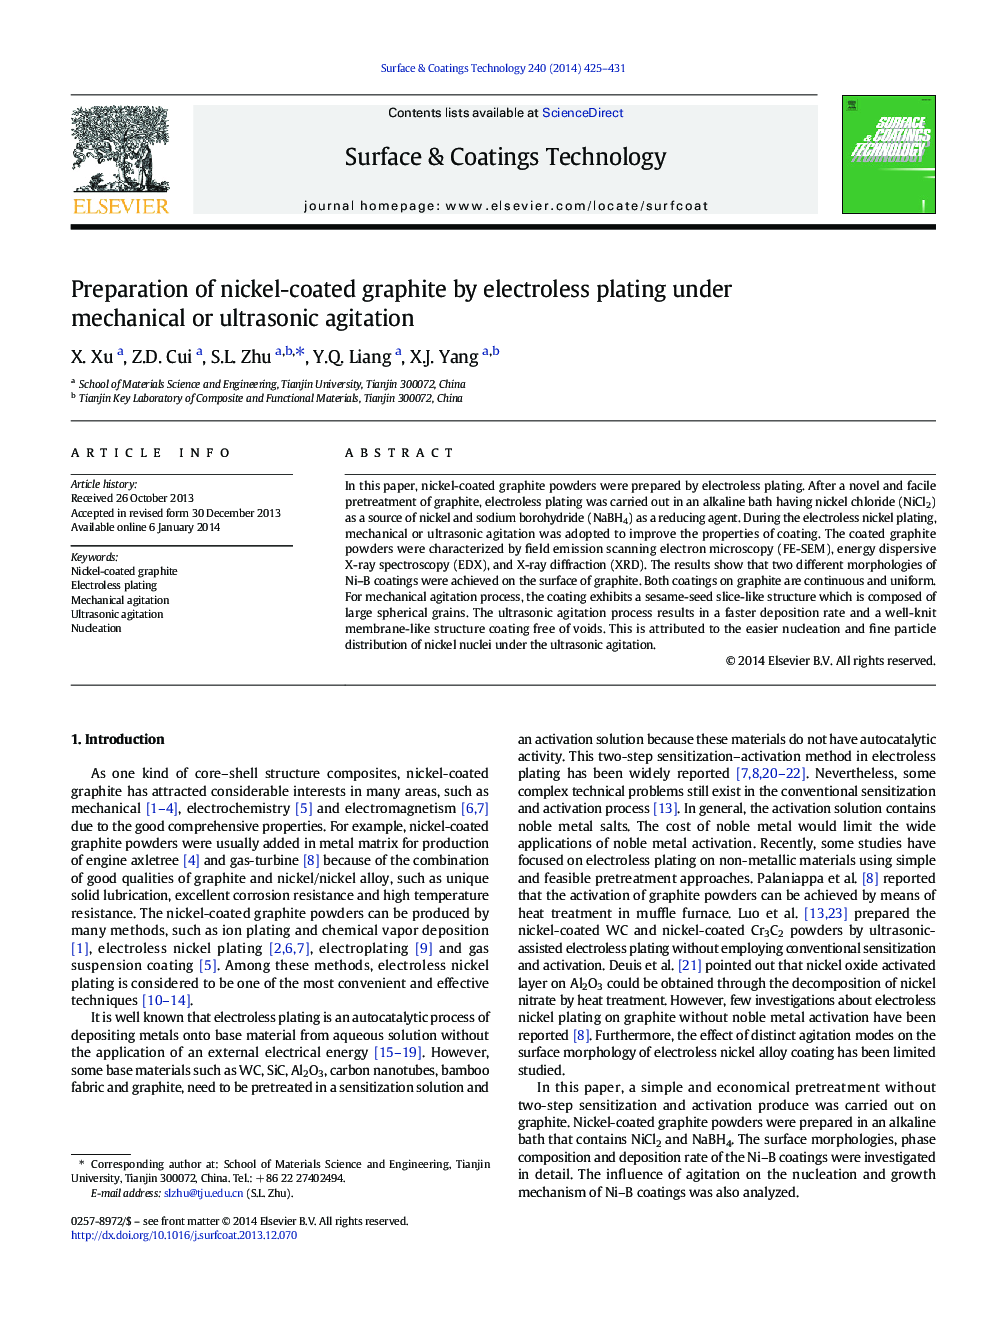 Preparation of nickel-coated graphite by electroless plating under mechanical or ultrasonic agitation